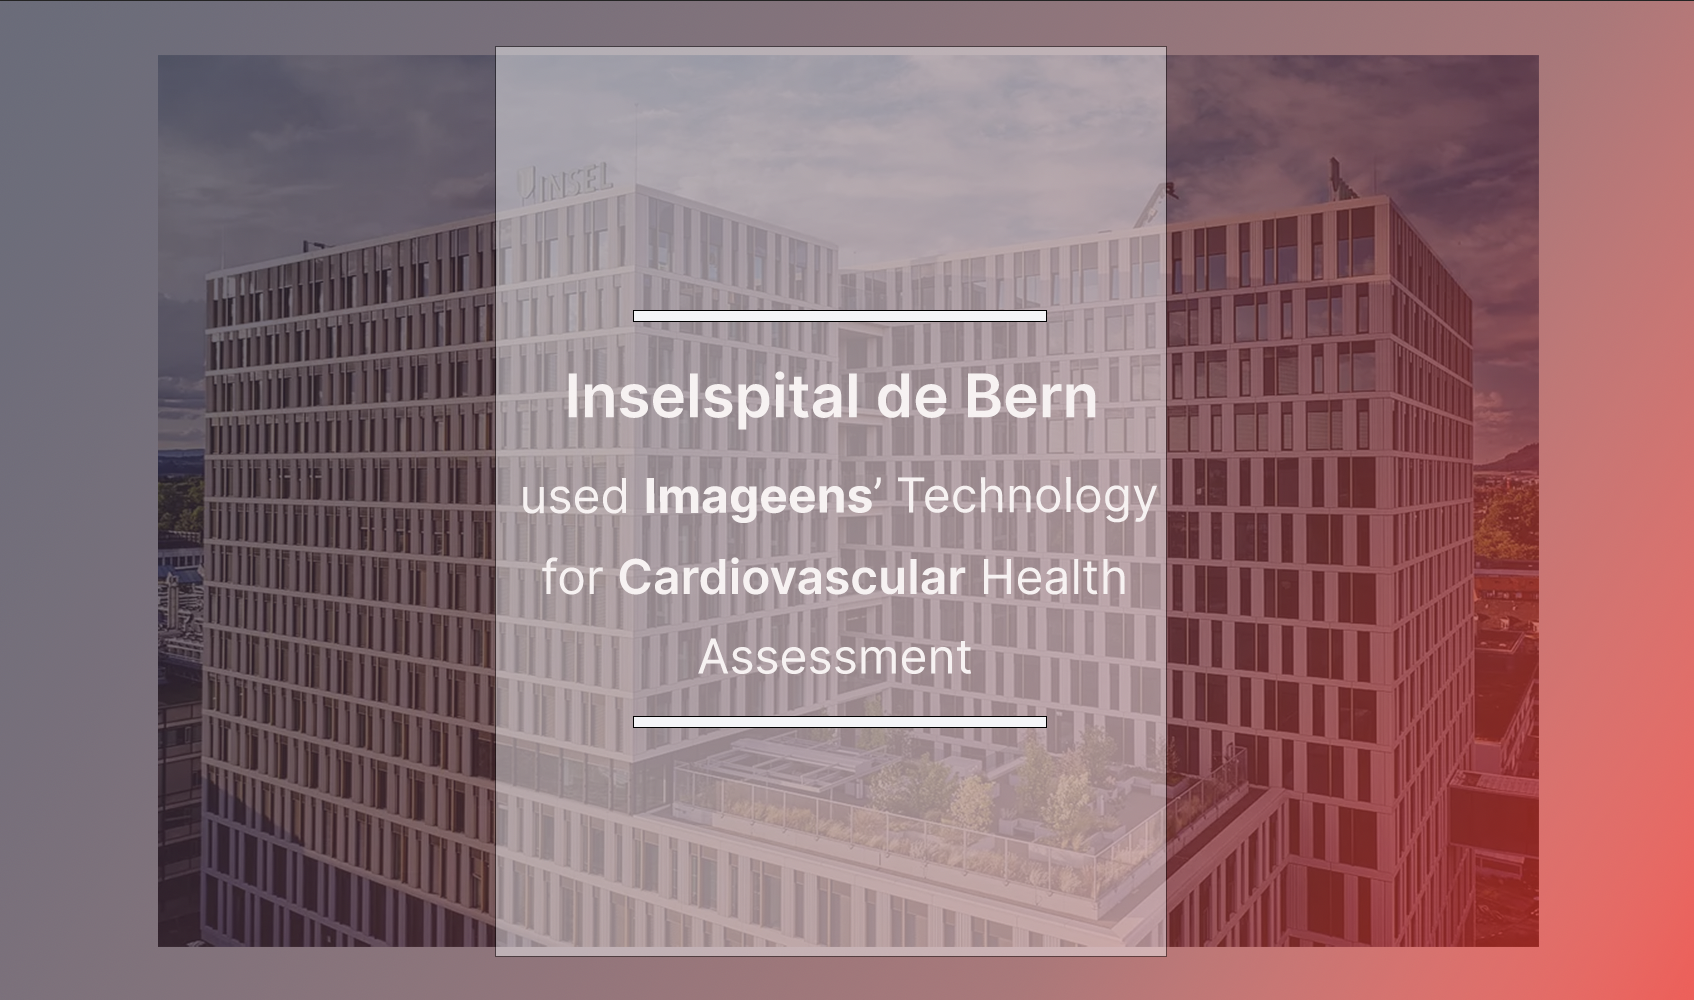 Inselspital de Bern used Imageens’ technology for Cardiovascular Health Assessment